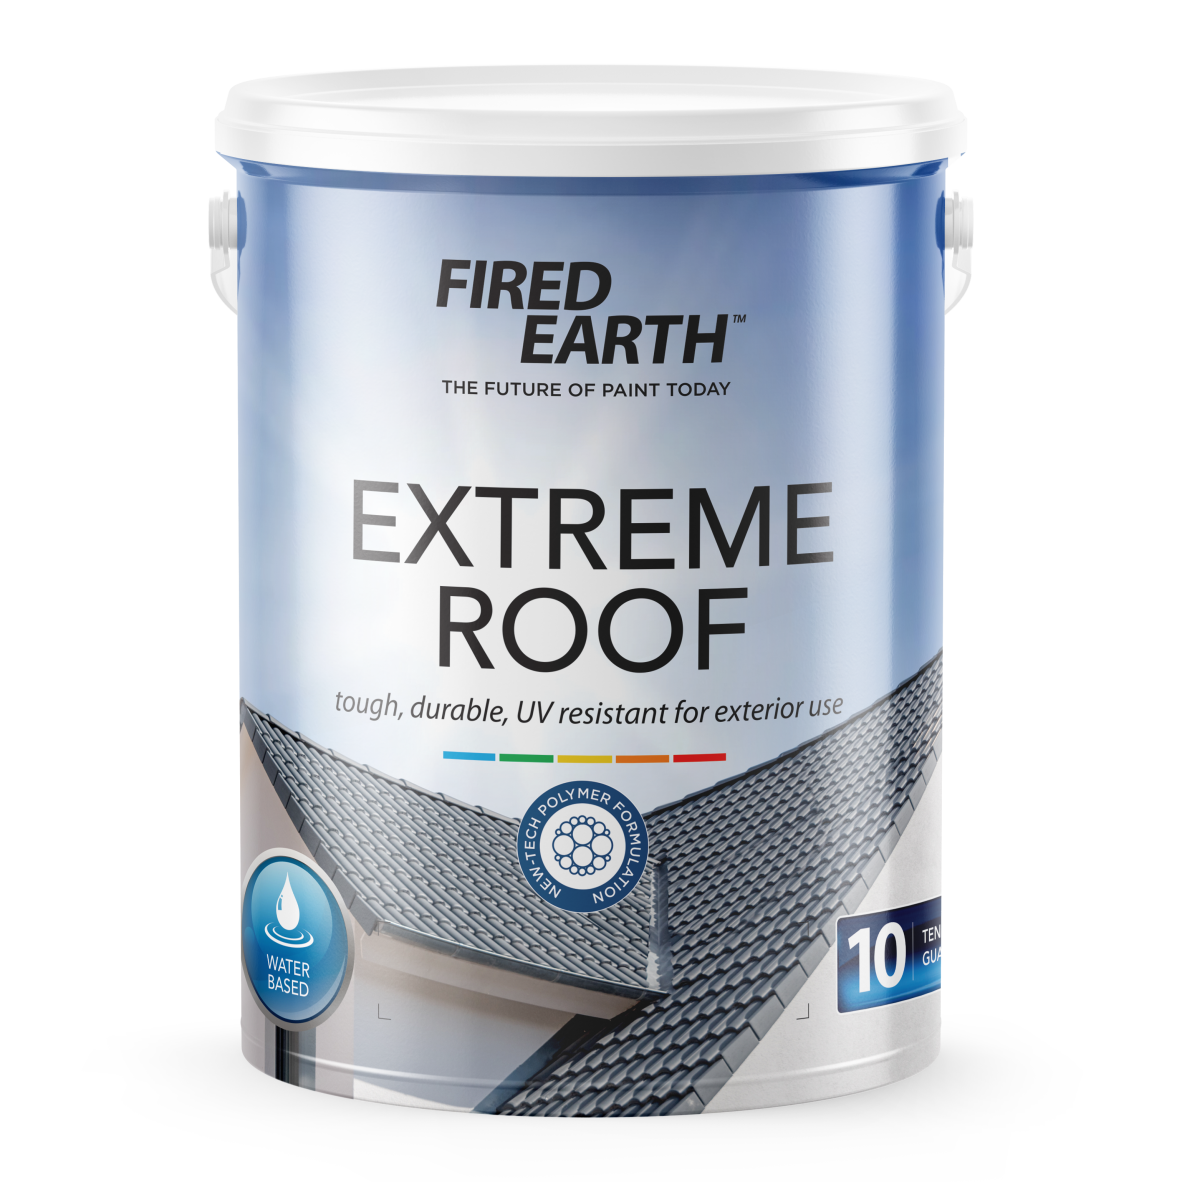 Extreme Roof REV10.png